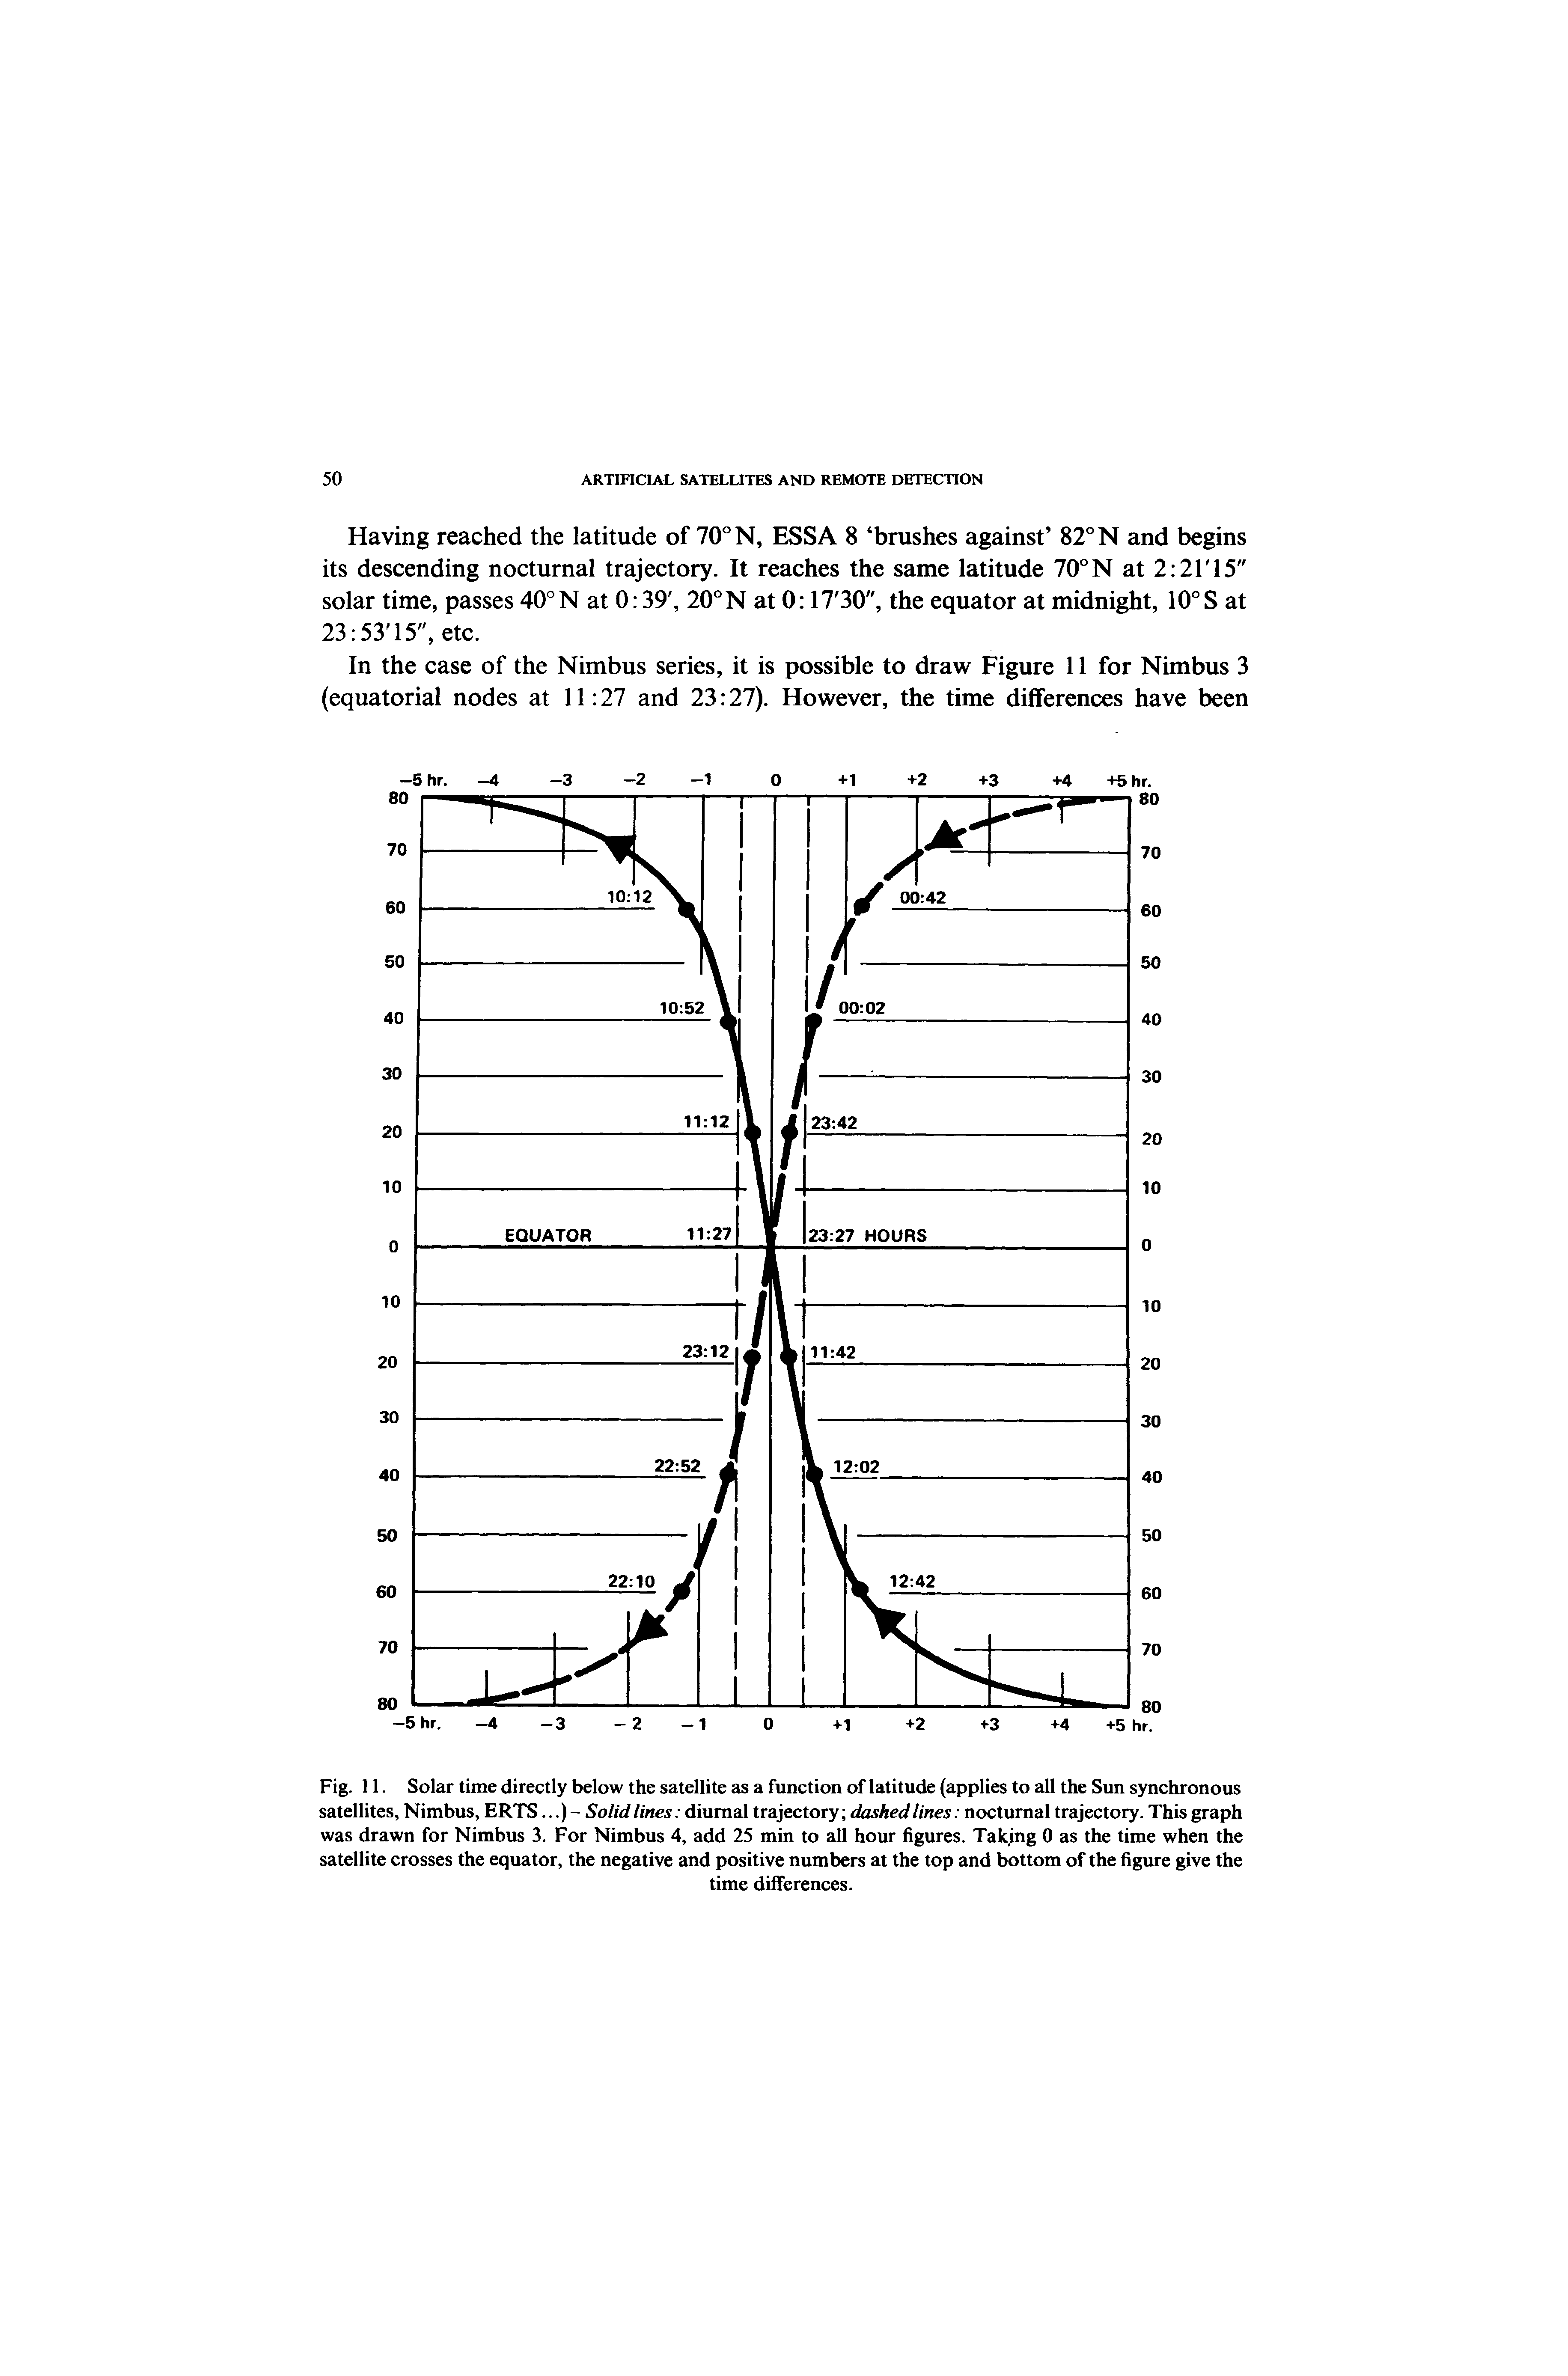 Fig. 11. Solar time directly below the satellite as a function of latitude (applies to all the Sun synchronous satellites. Nimbus, ERTS...) - Solid lines diurnal trajectory dashed lines nocturnal trajectory. This graph was drawn for Nimbus 3. For Nimbus 4, add 25 min to all hour figures. Takjng 0 as the time when the satellite crosses the equator, the negative and positive numbers at the top and bottom of the figure give the...